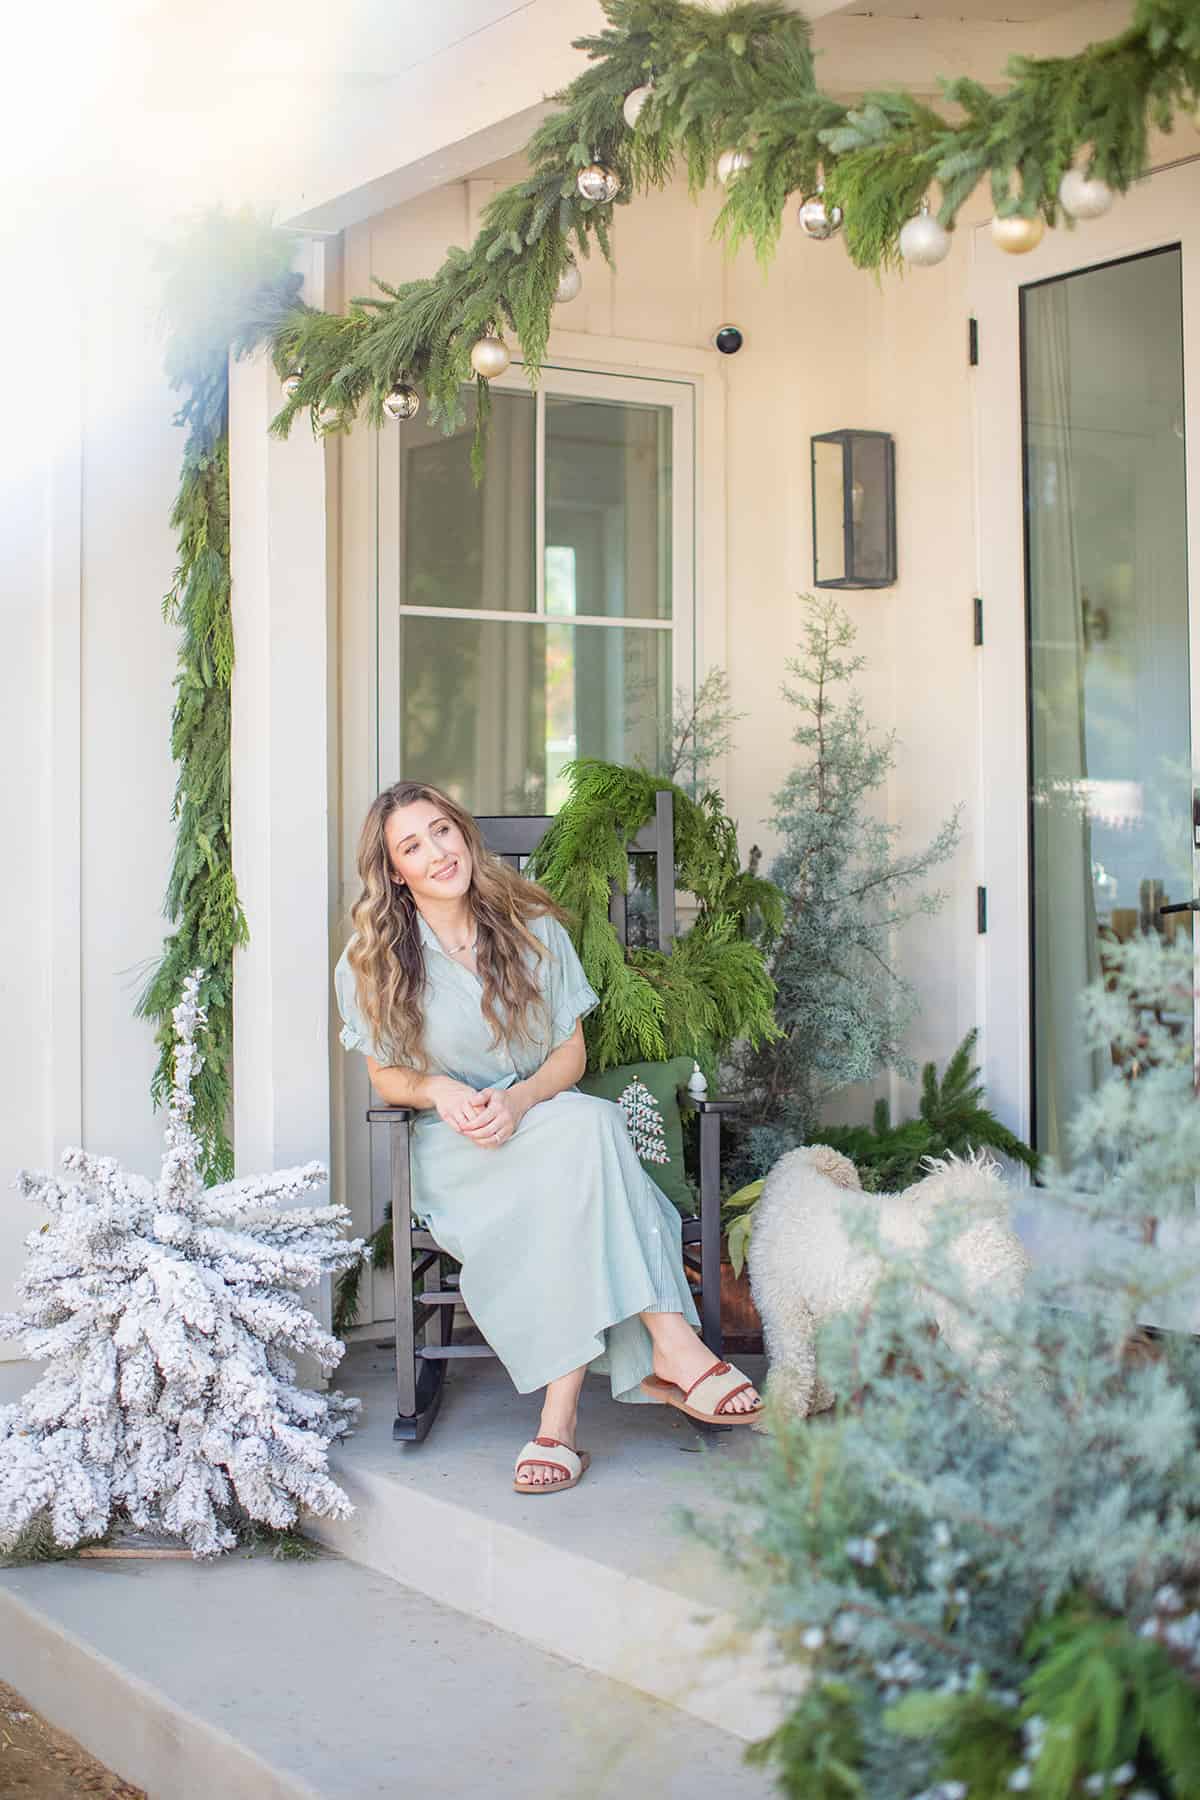 Eden Passante sitting on a rocking chair on her decorated  Christmas porch.